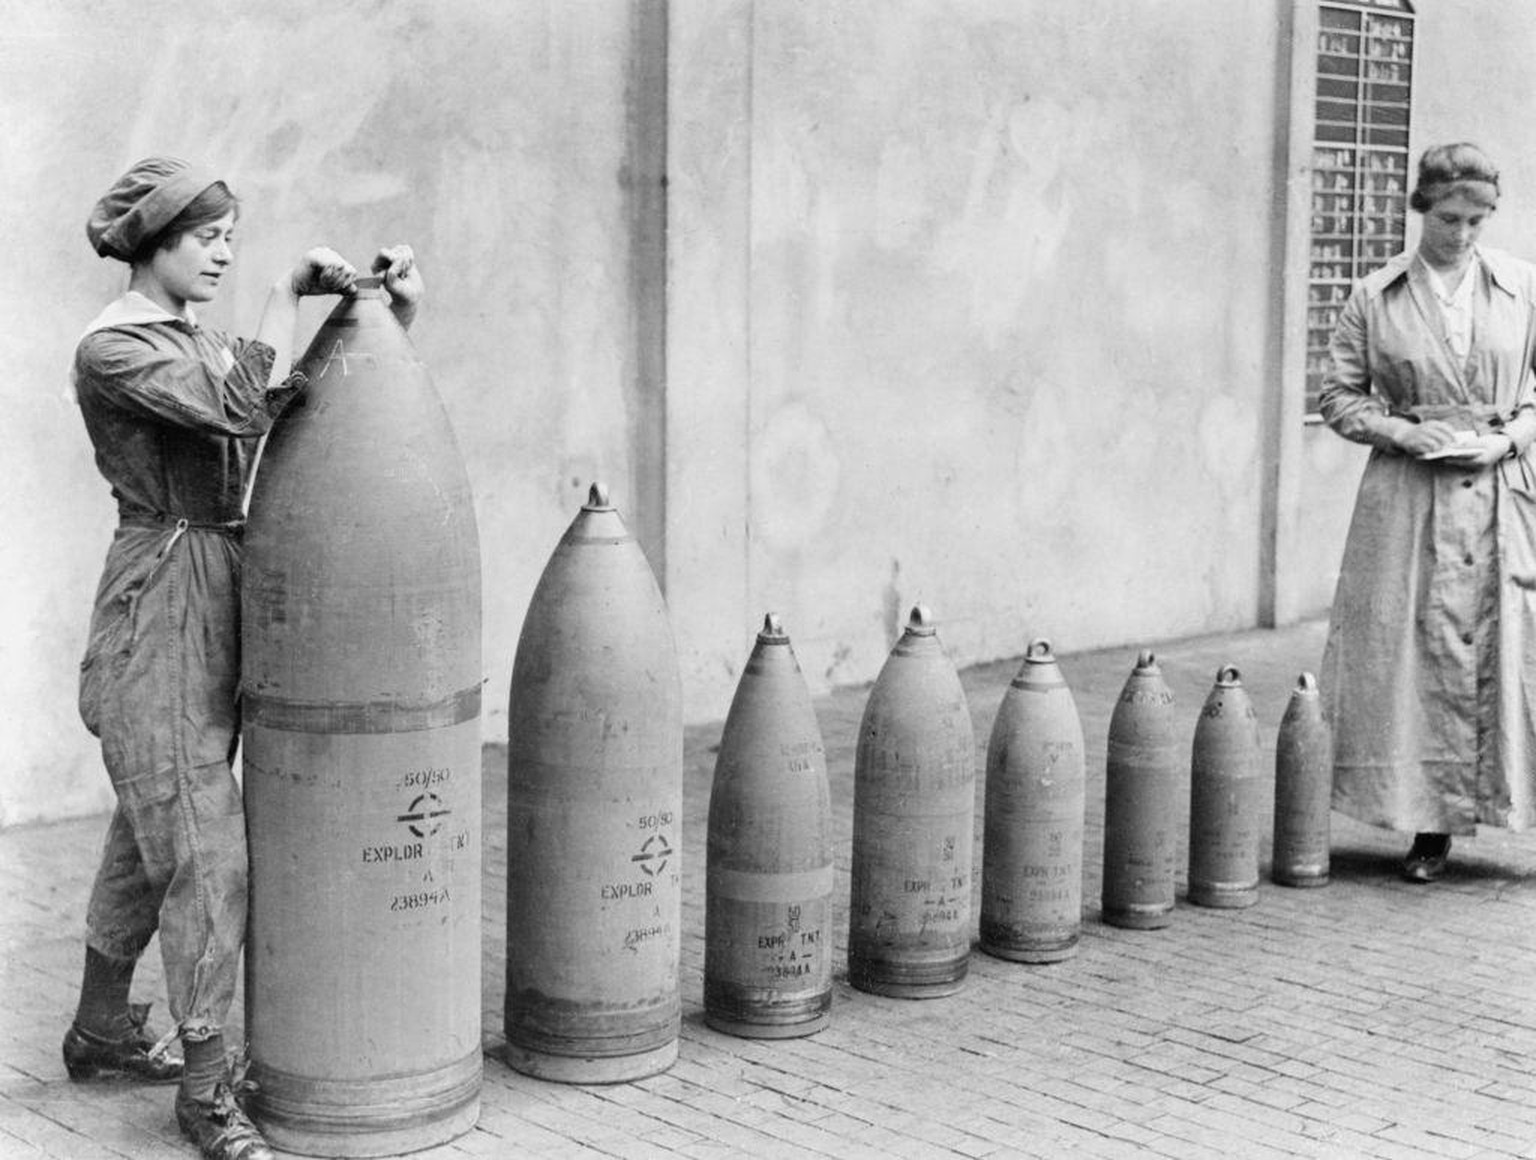 Women At Work During The First World War: Munitions Production, Chilwell, Nottinghamshire, England, UK, c. 1917, Two women munitions workers stand beside examples of the shells produced at National Sh ...